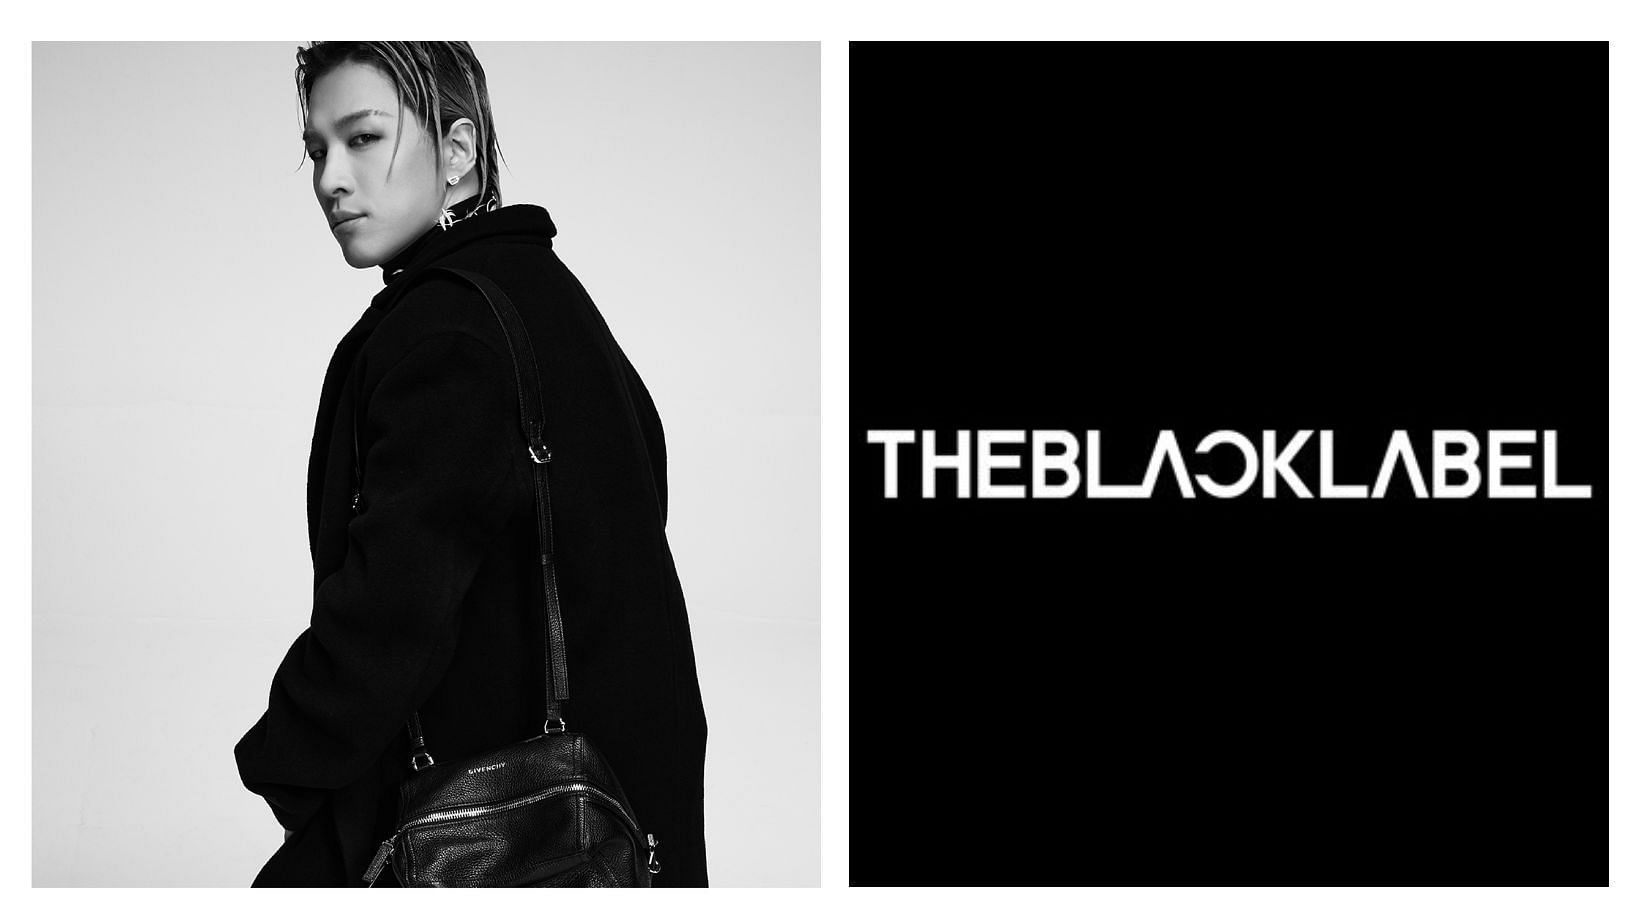 THEBLACKLABEL reportedly relocating its headquarters in a move to become an independent label. (Images via X/@THEBLACKLABEL)